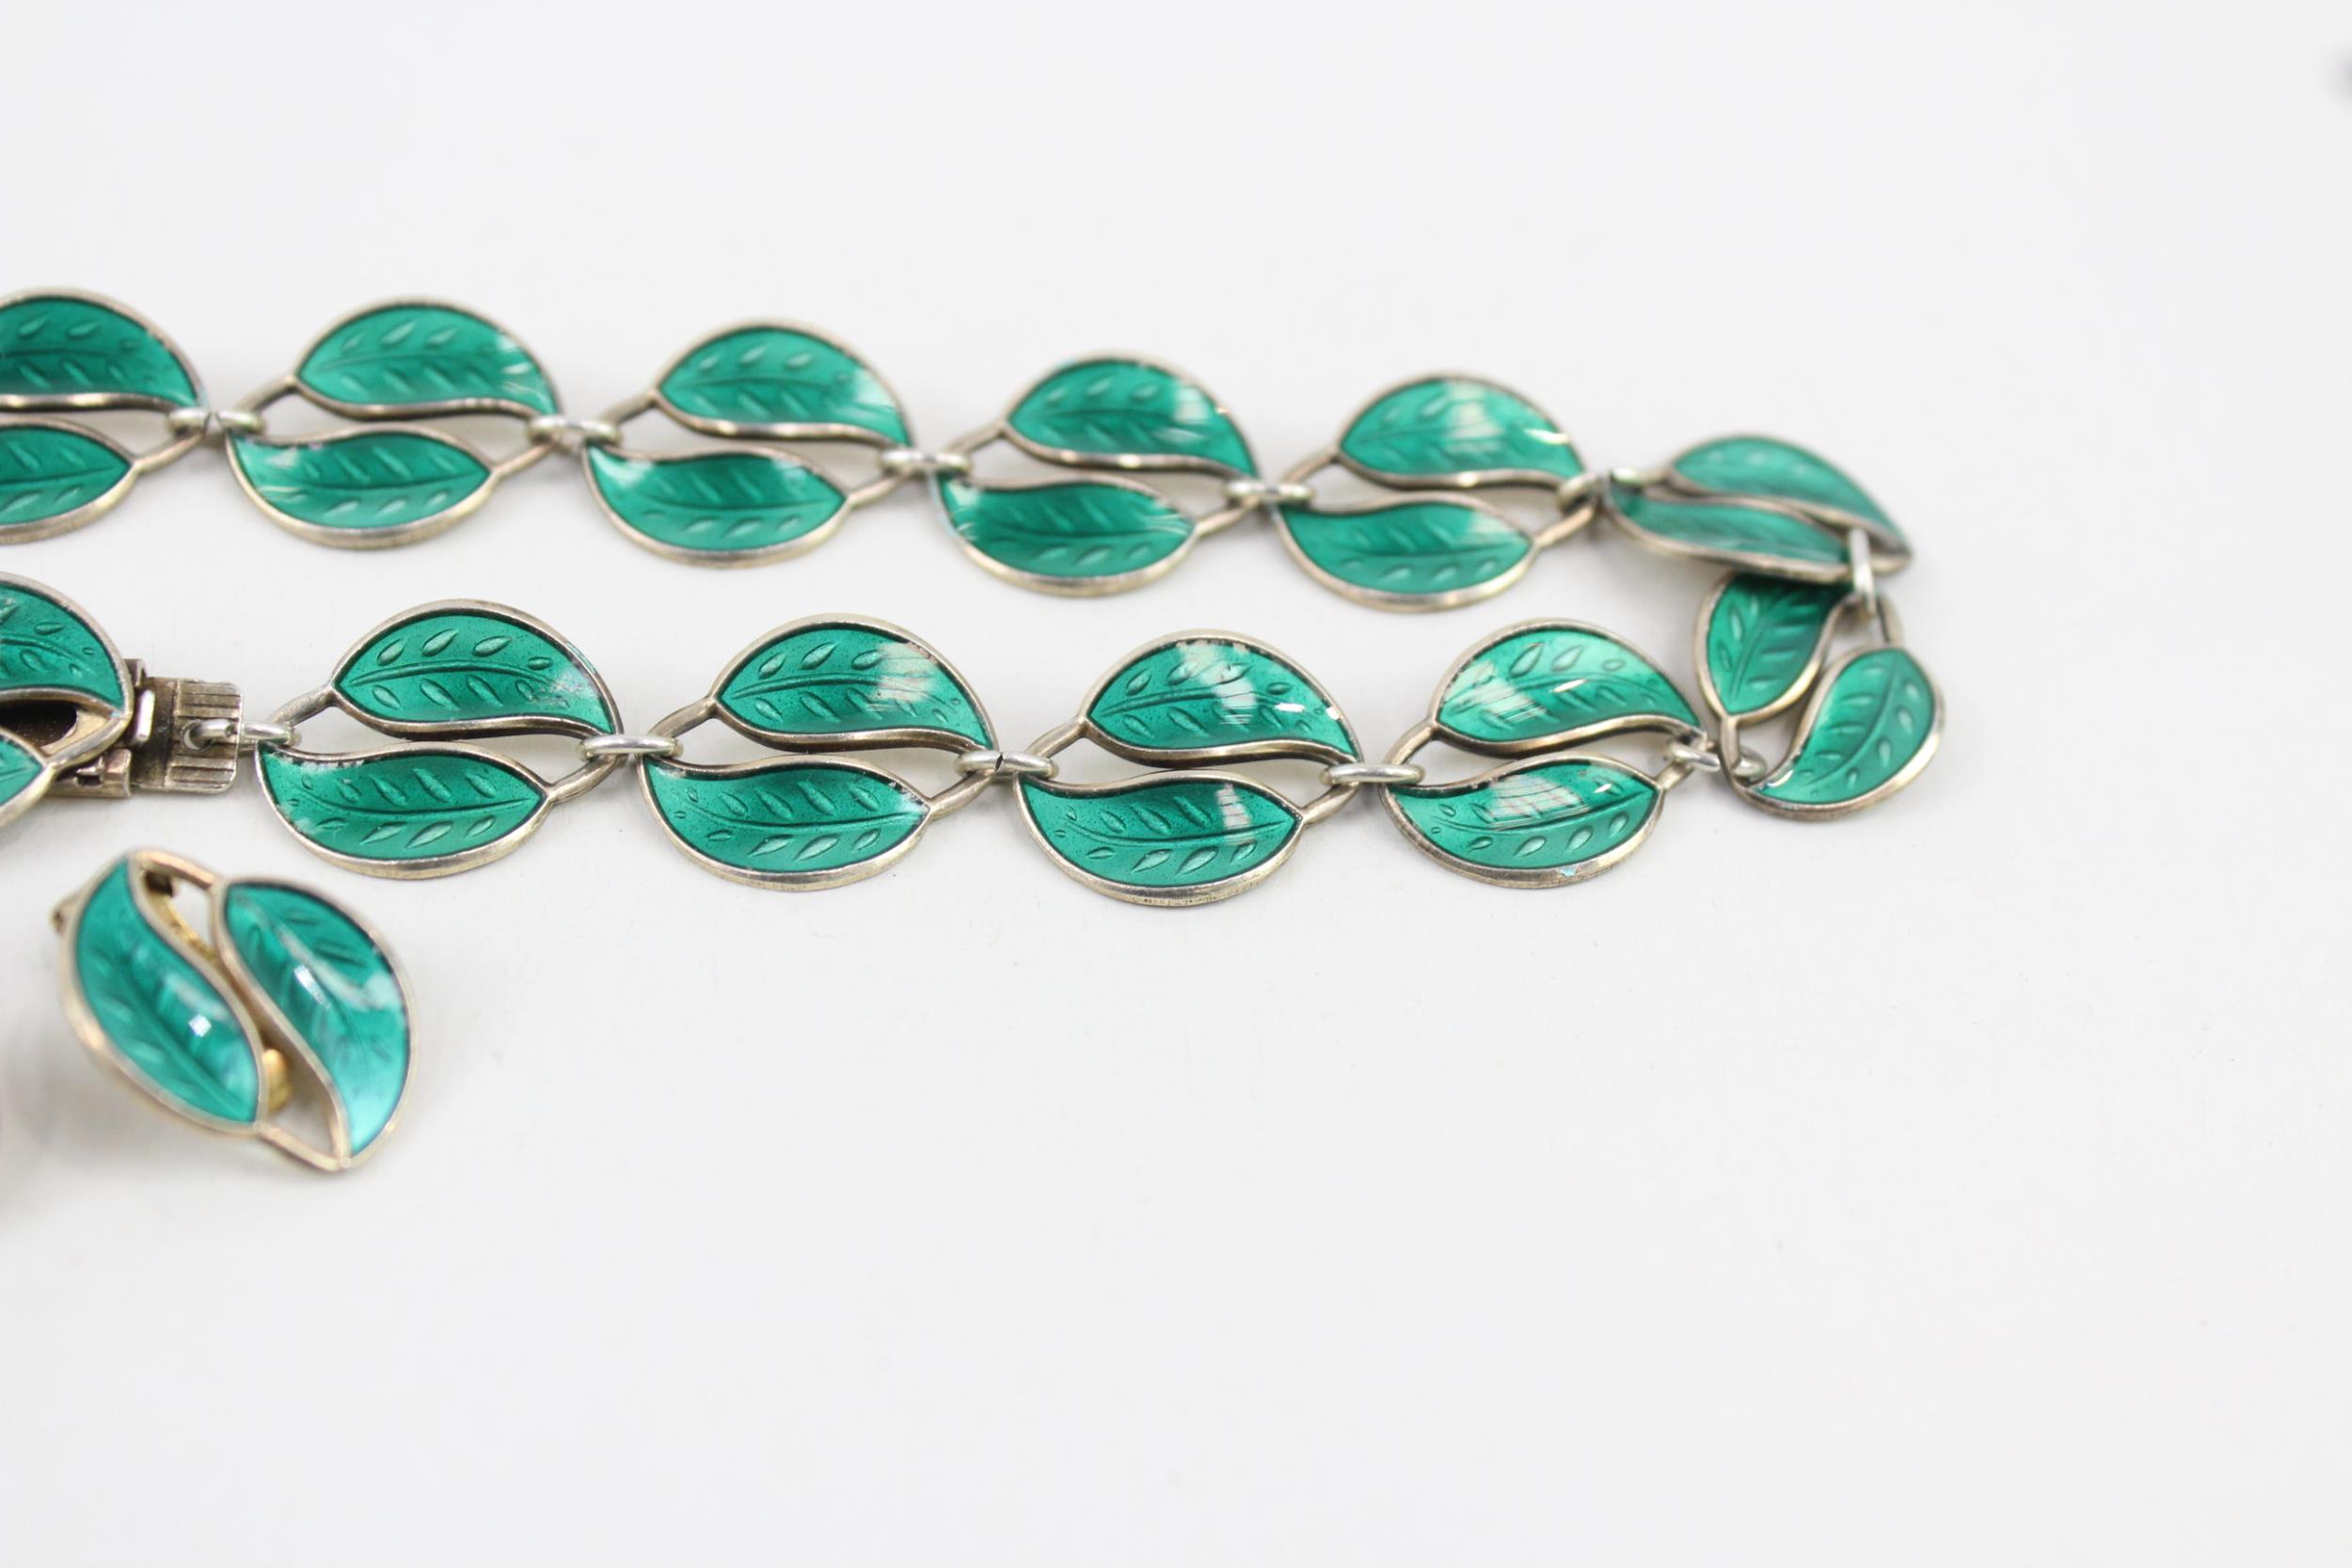 Silver enamel necklace and clip on earrings jewellery set by David Anderson (30g) - Image 6 of 8